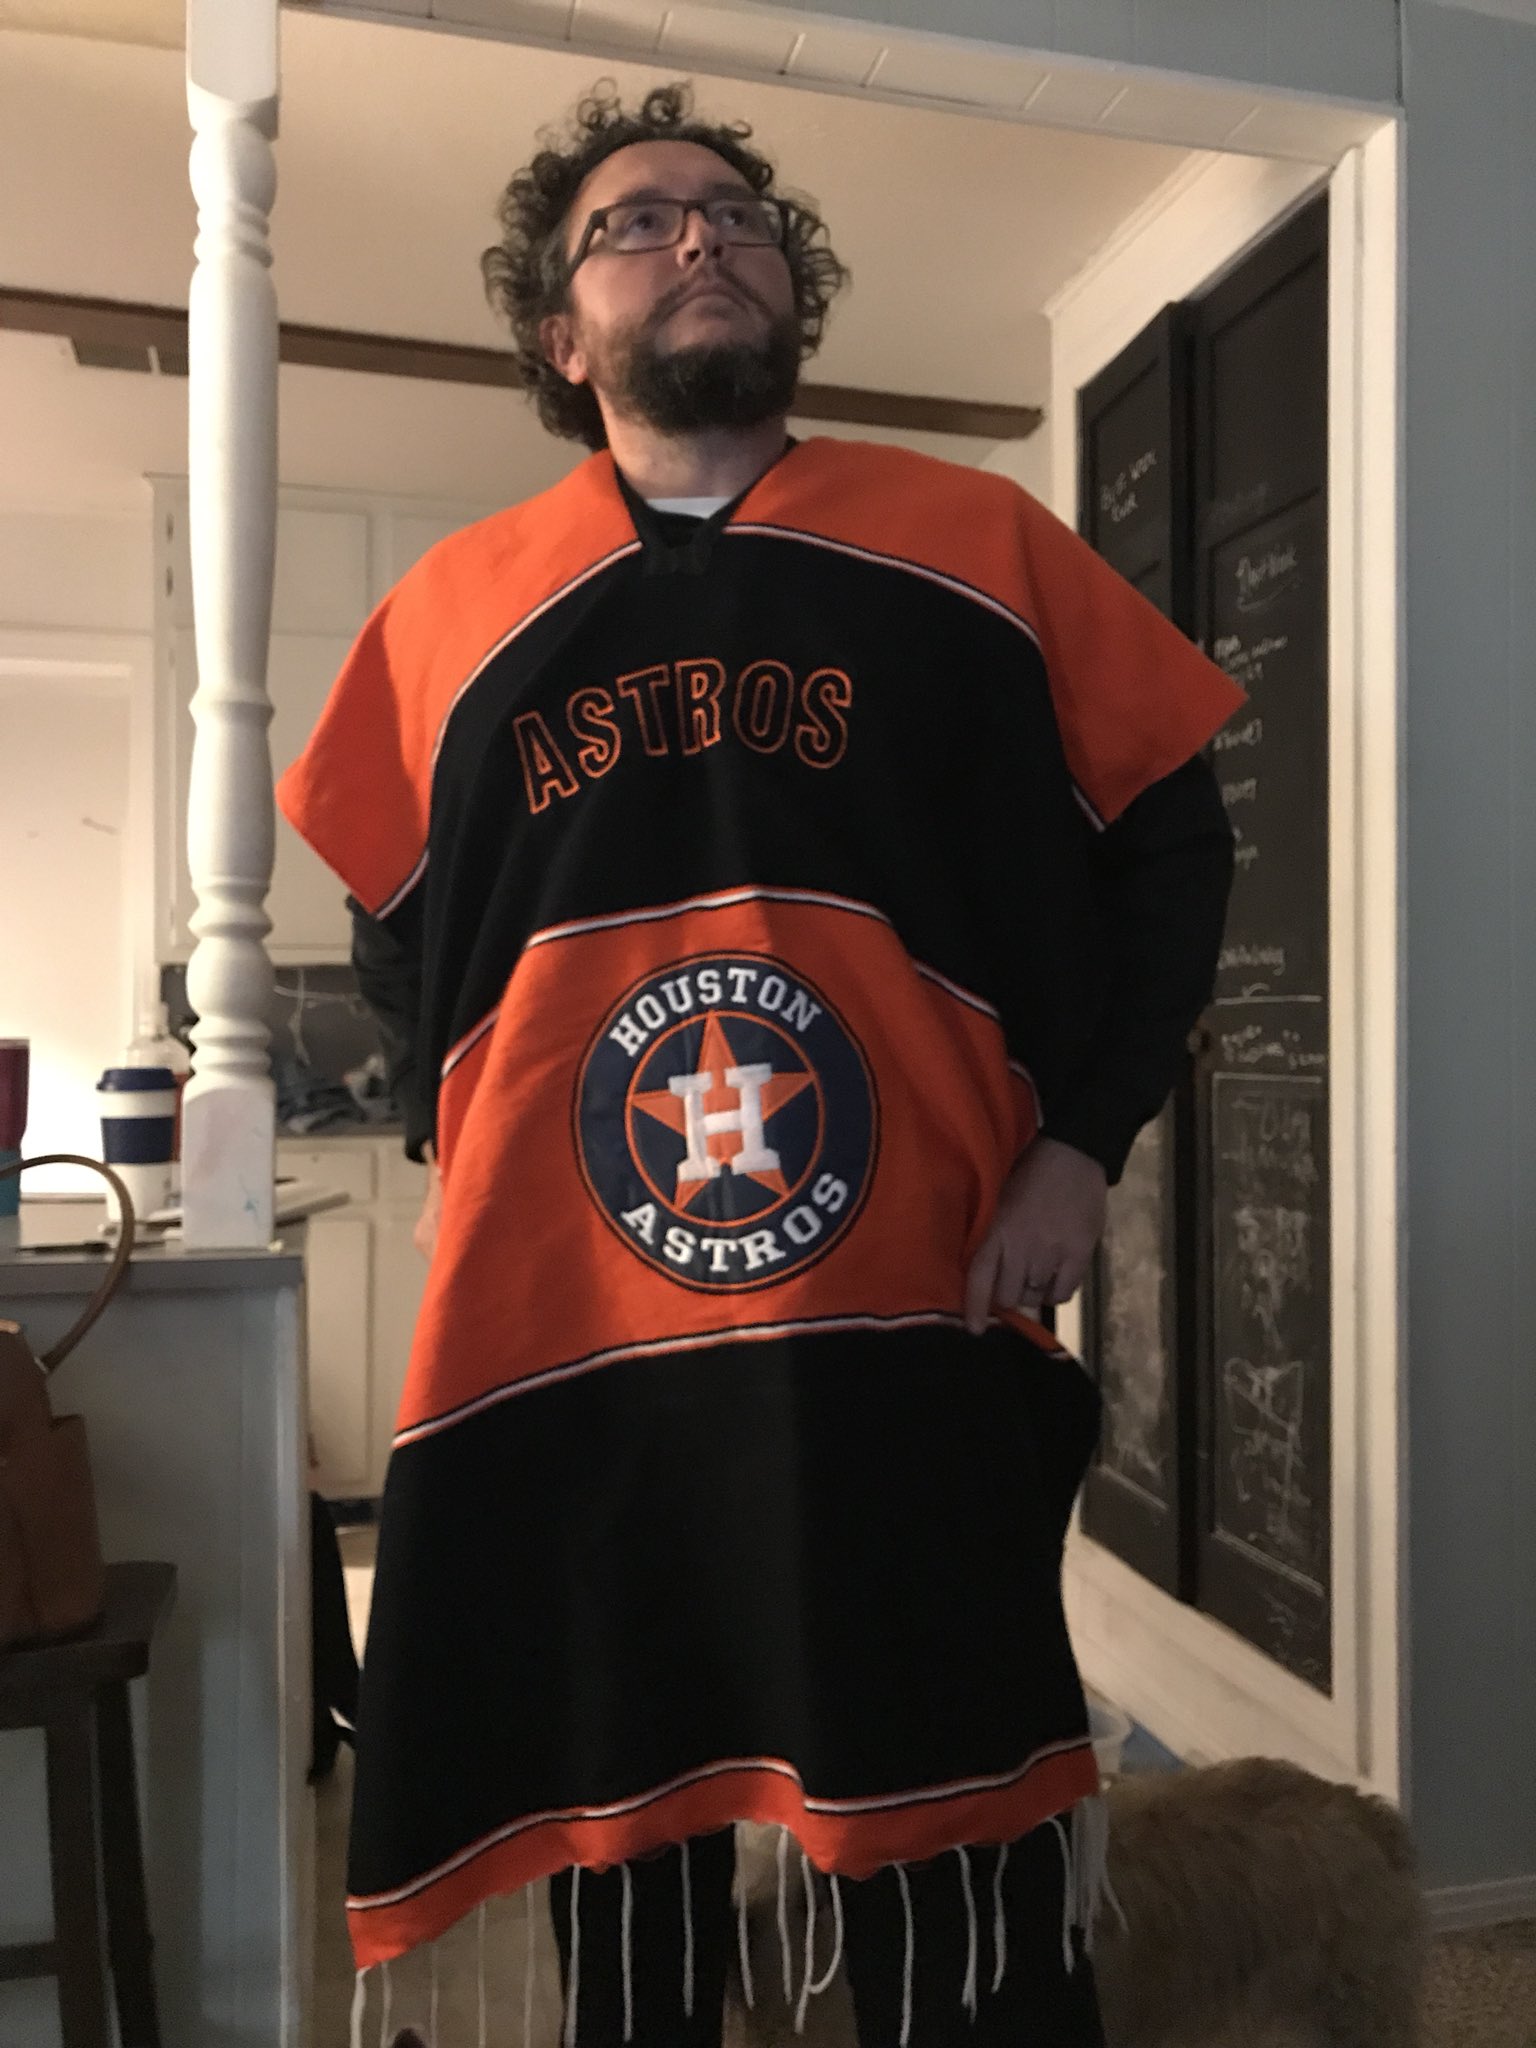 Thickie Don on X: The student who got me an Astros poncho from